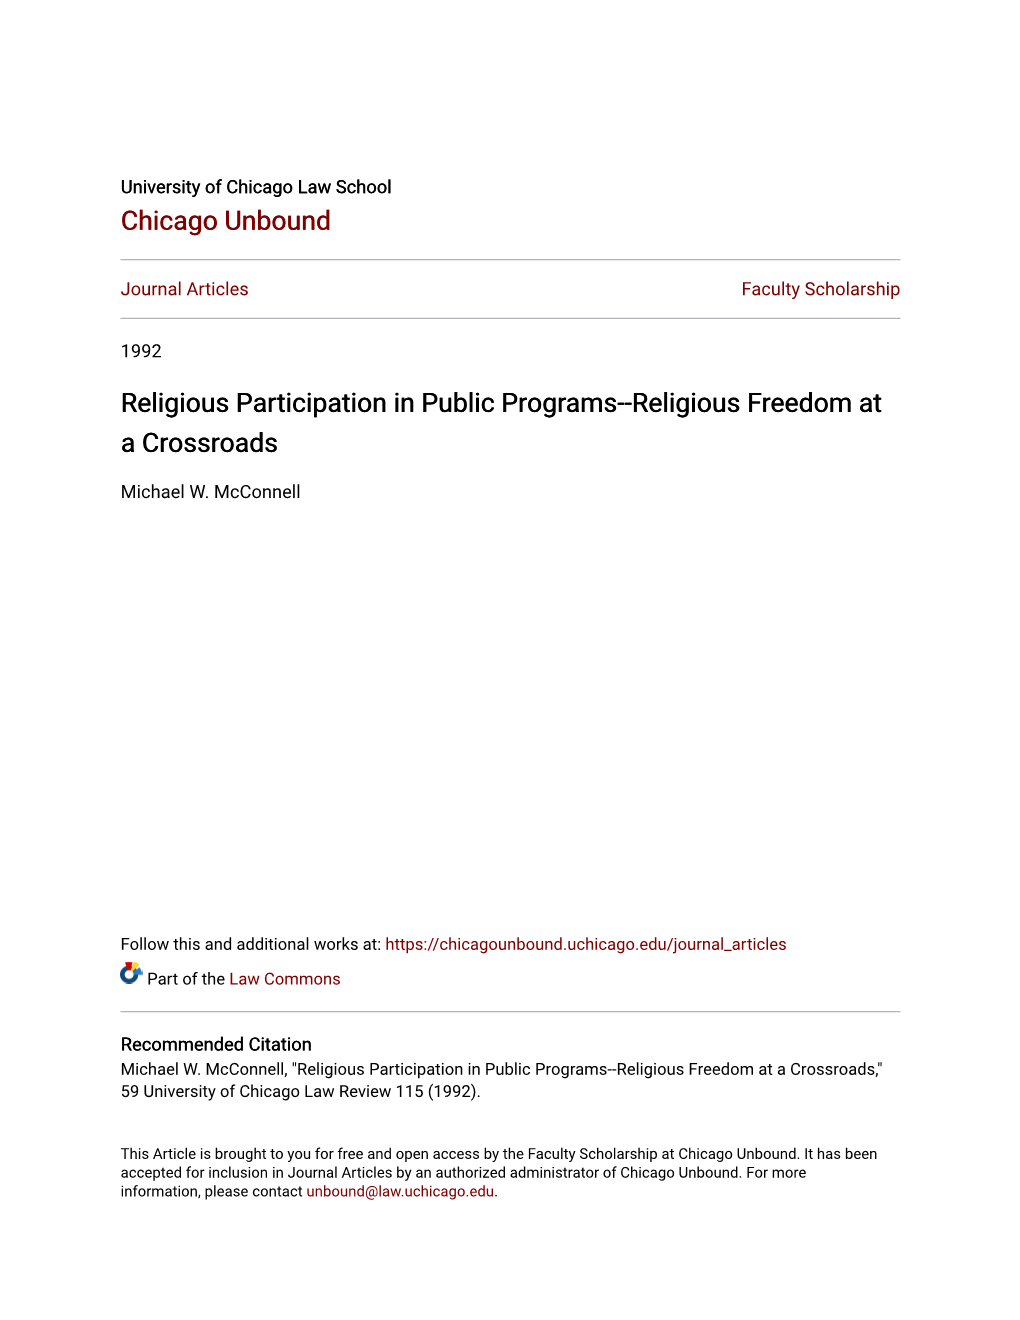 Religious Participation in Public Programs--Religious Freedom at a Crossroads